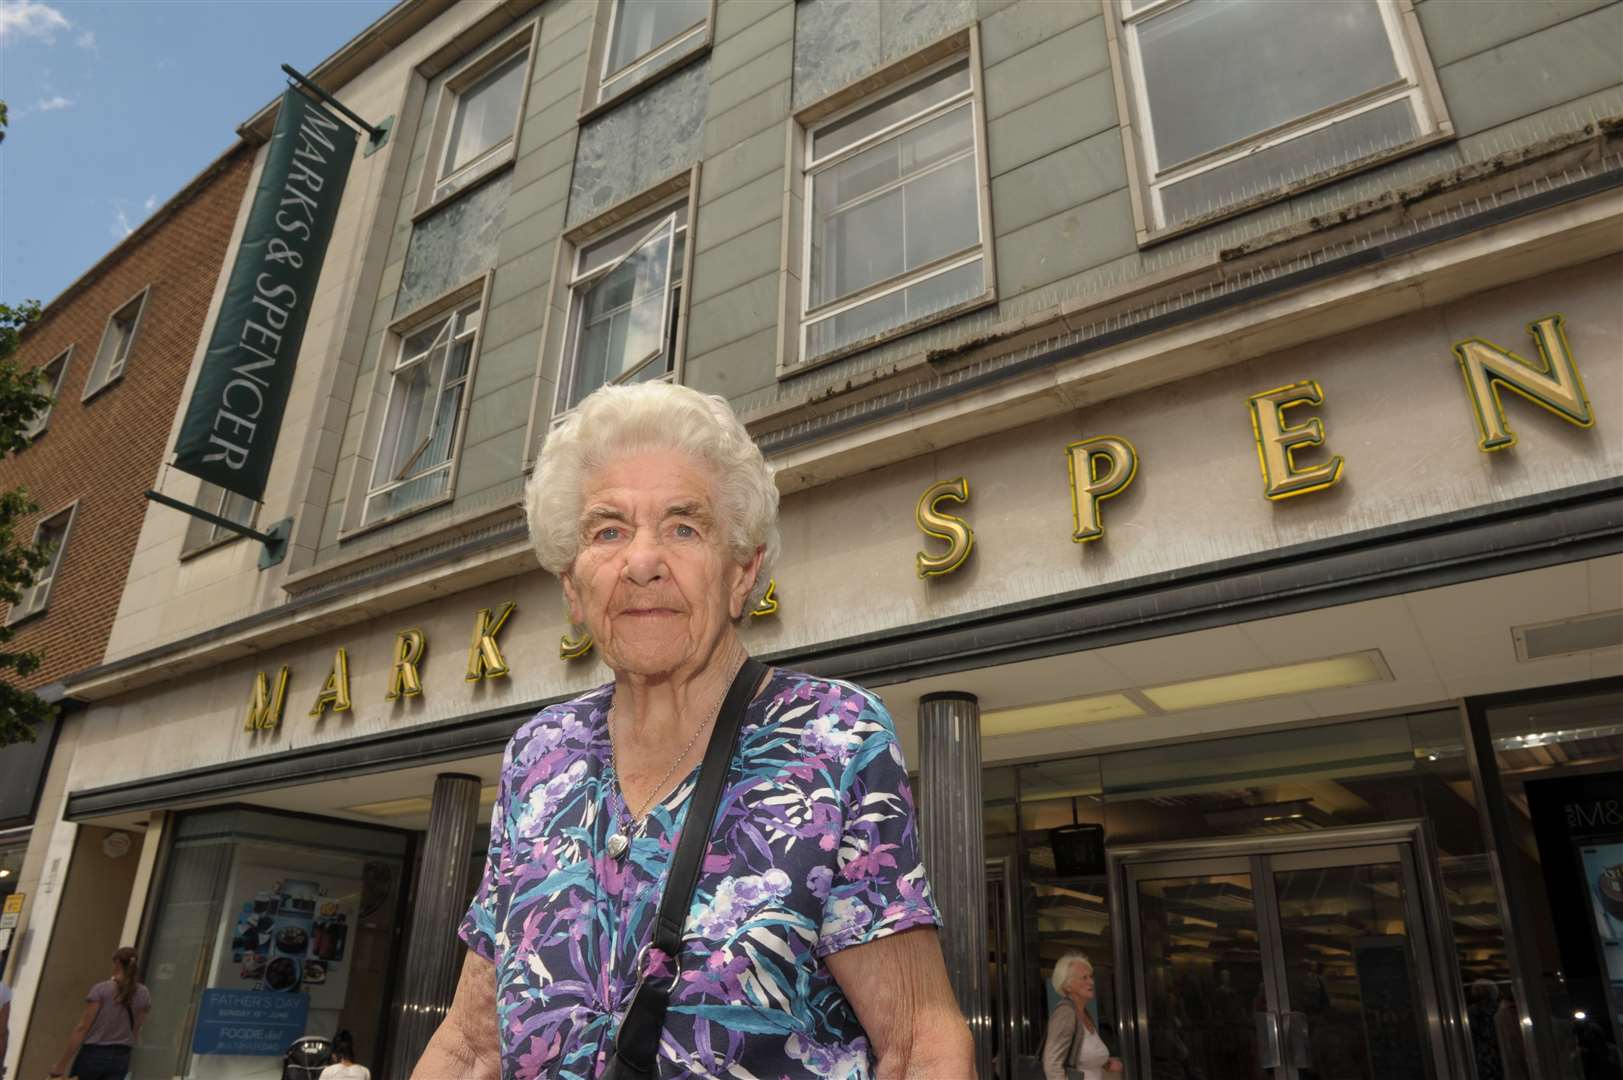 Vera Purll pictured outside Marks & Spencer in Gravesend, in 2014, aged 93